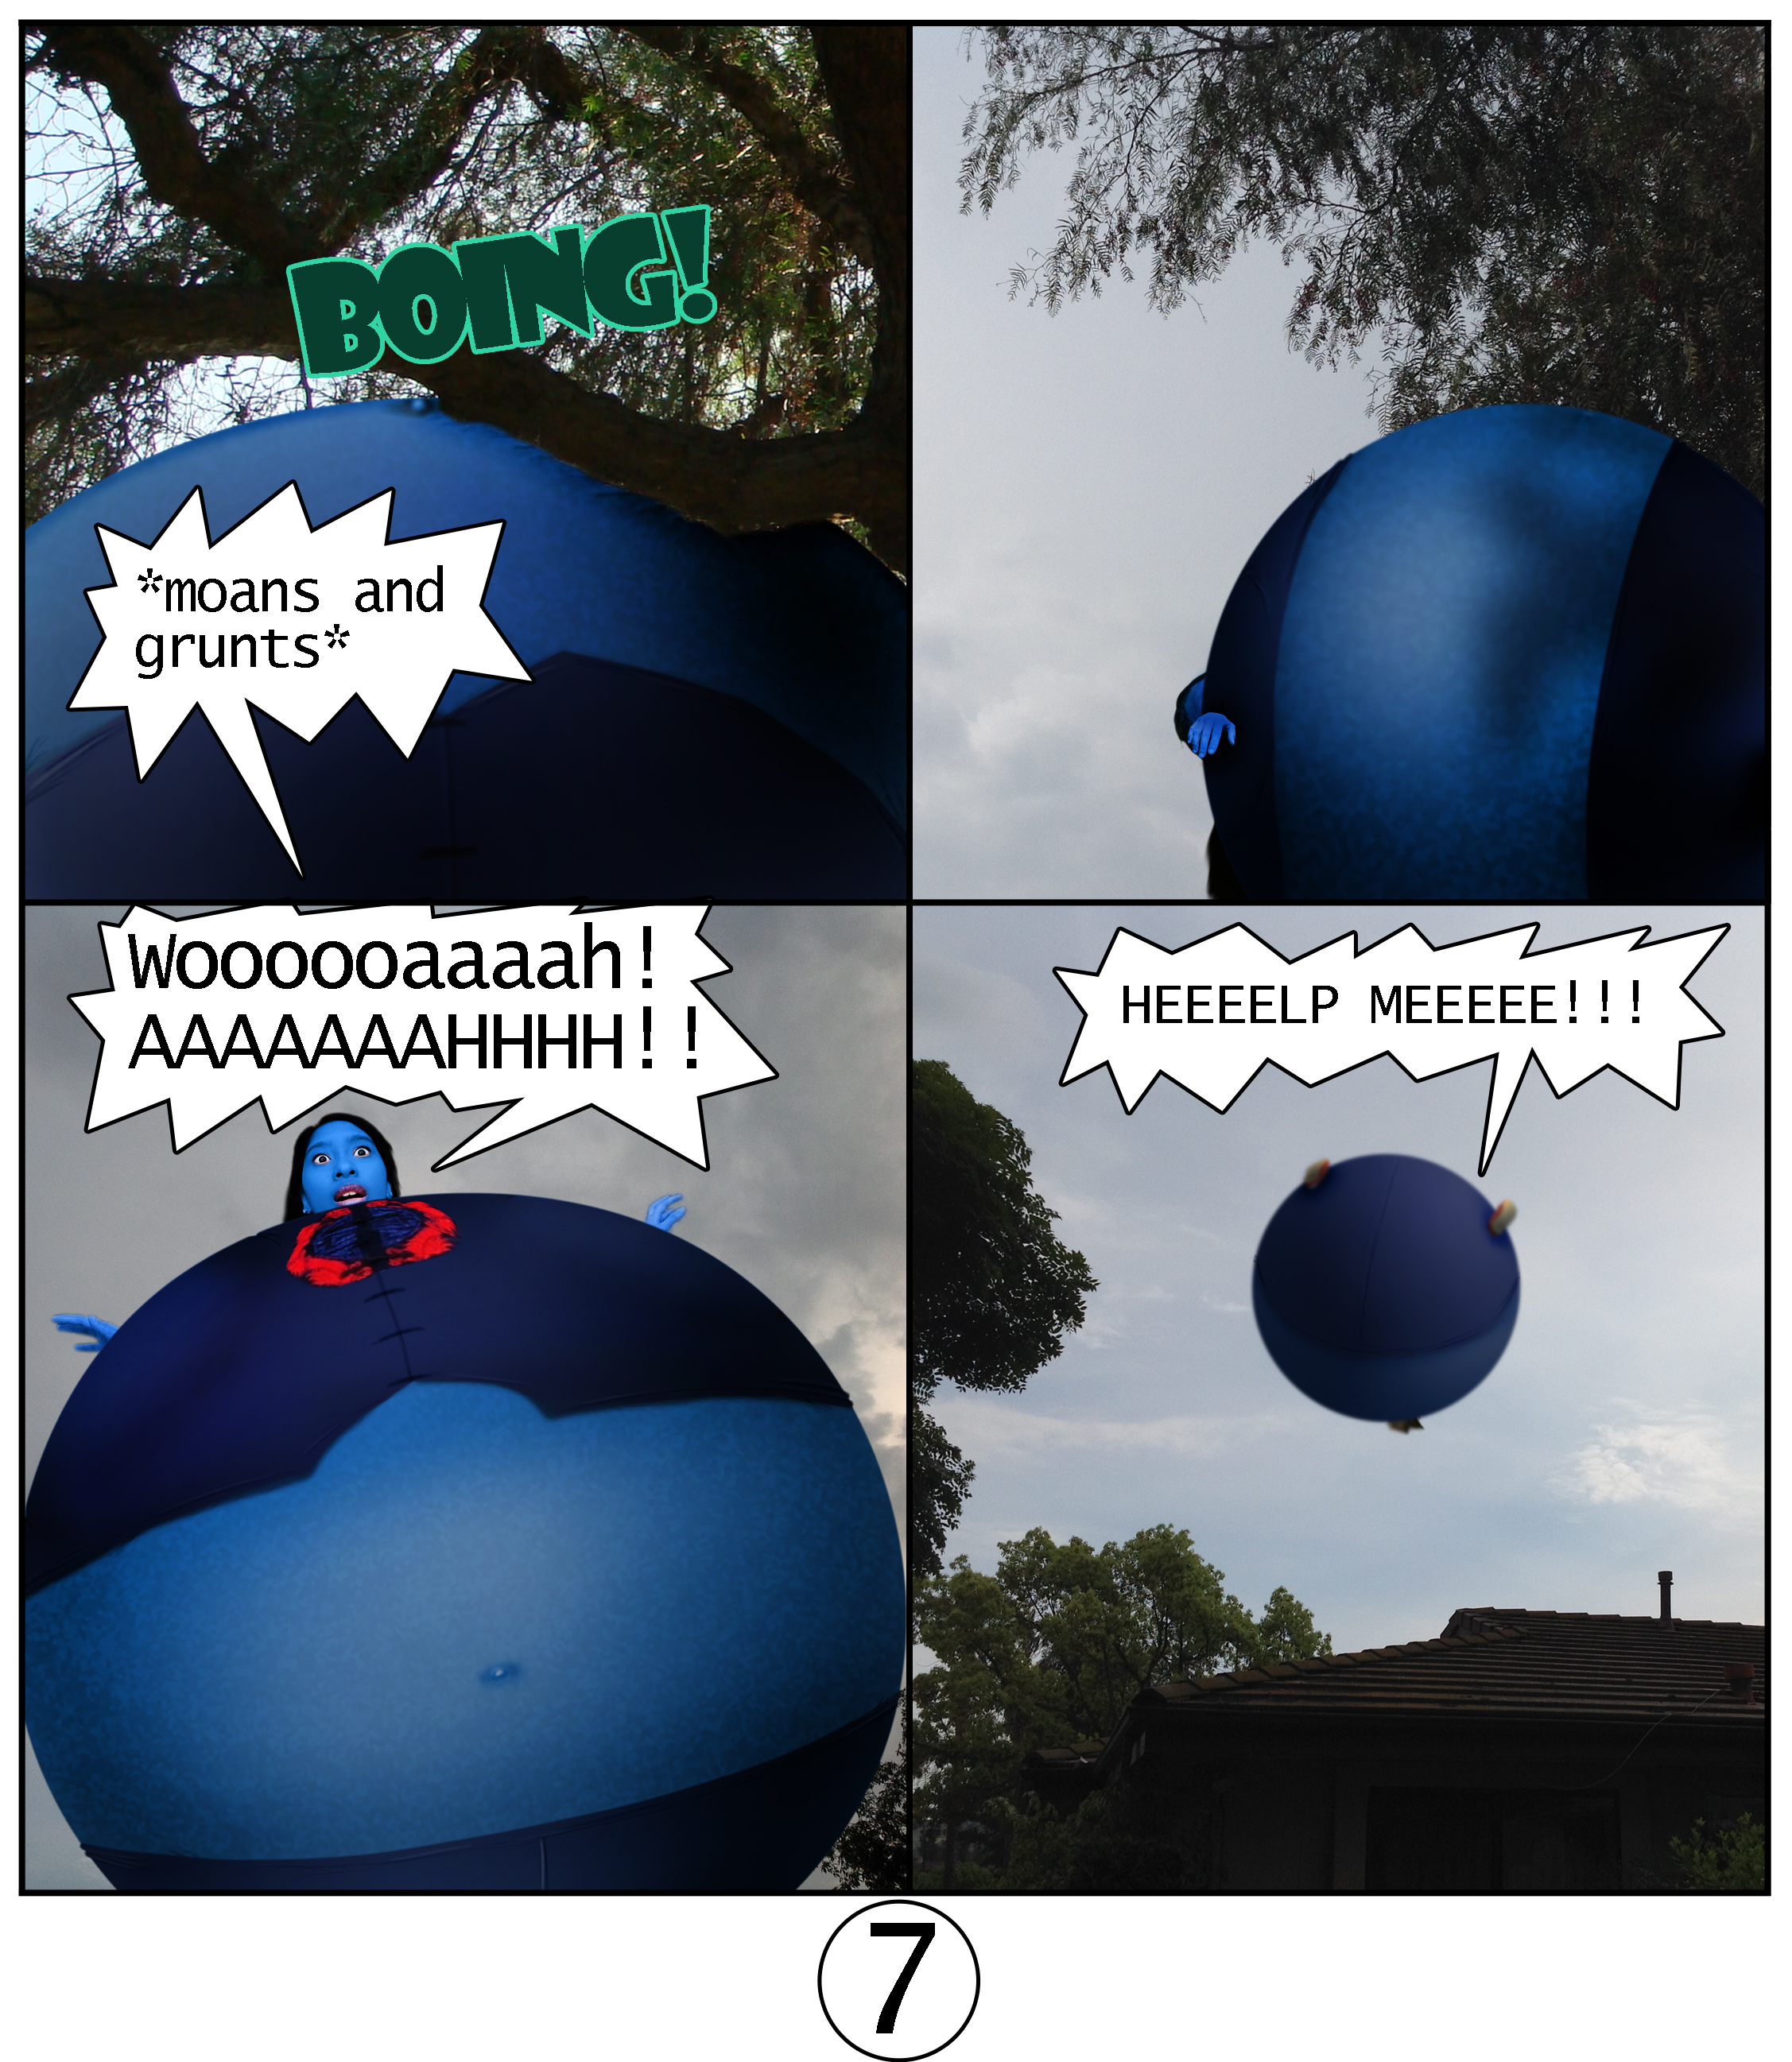 Inflation real life. Blueberry inflation Kristina. Blueberry inflation. Chew it Kristina. Kristina inflation Blueberry Comics 1.